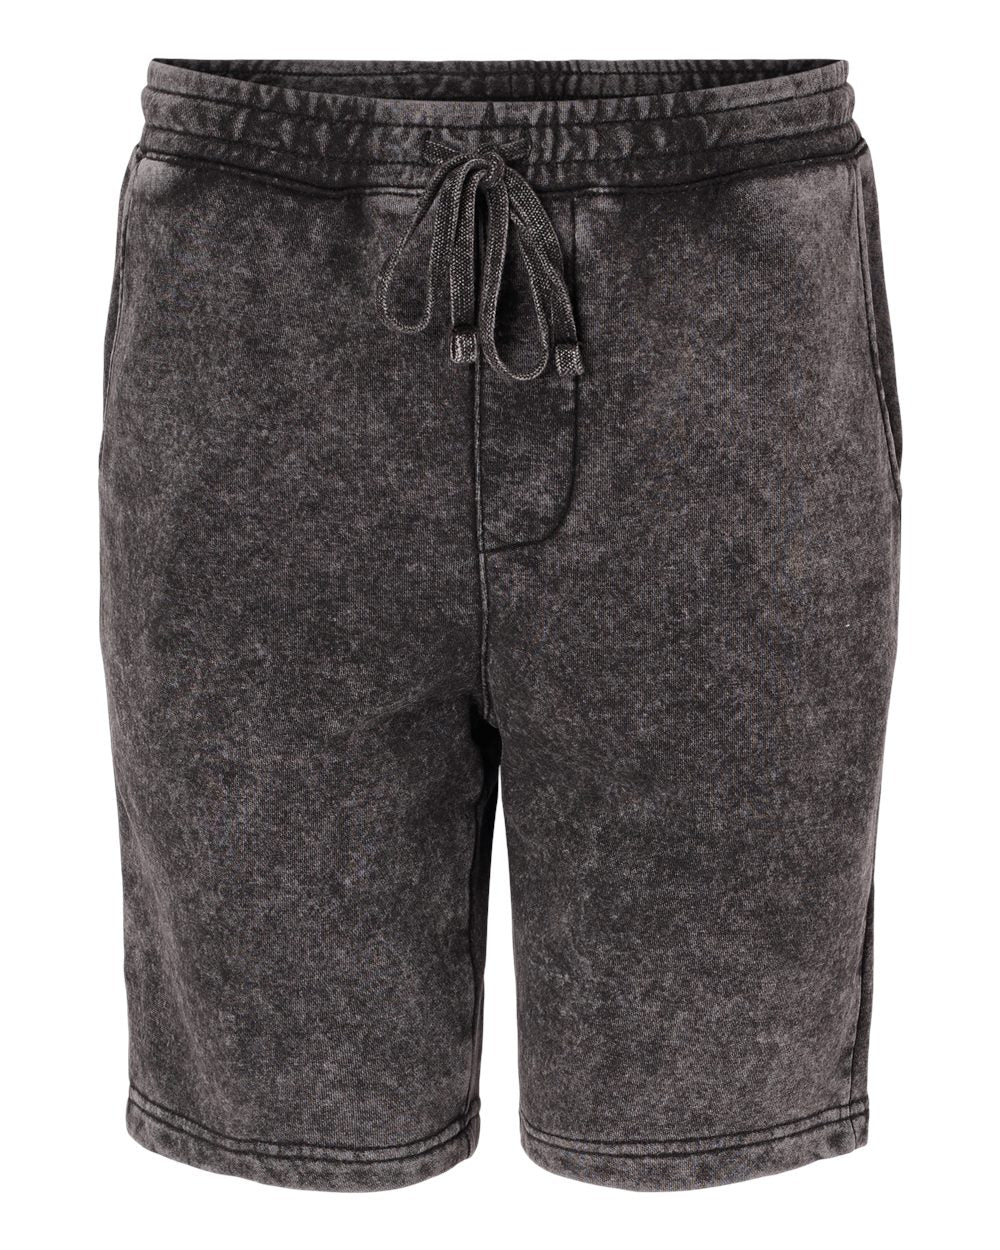 Independent Trading Co. - Mineral Wash Fleece Shorts